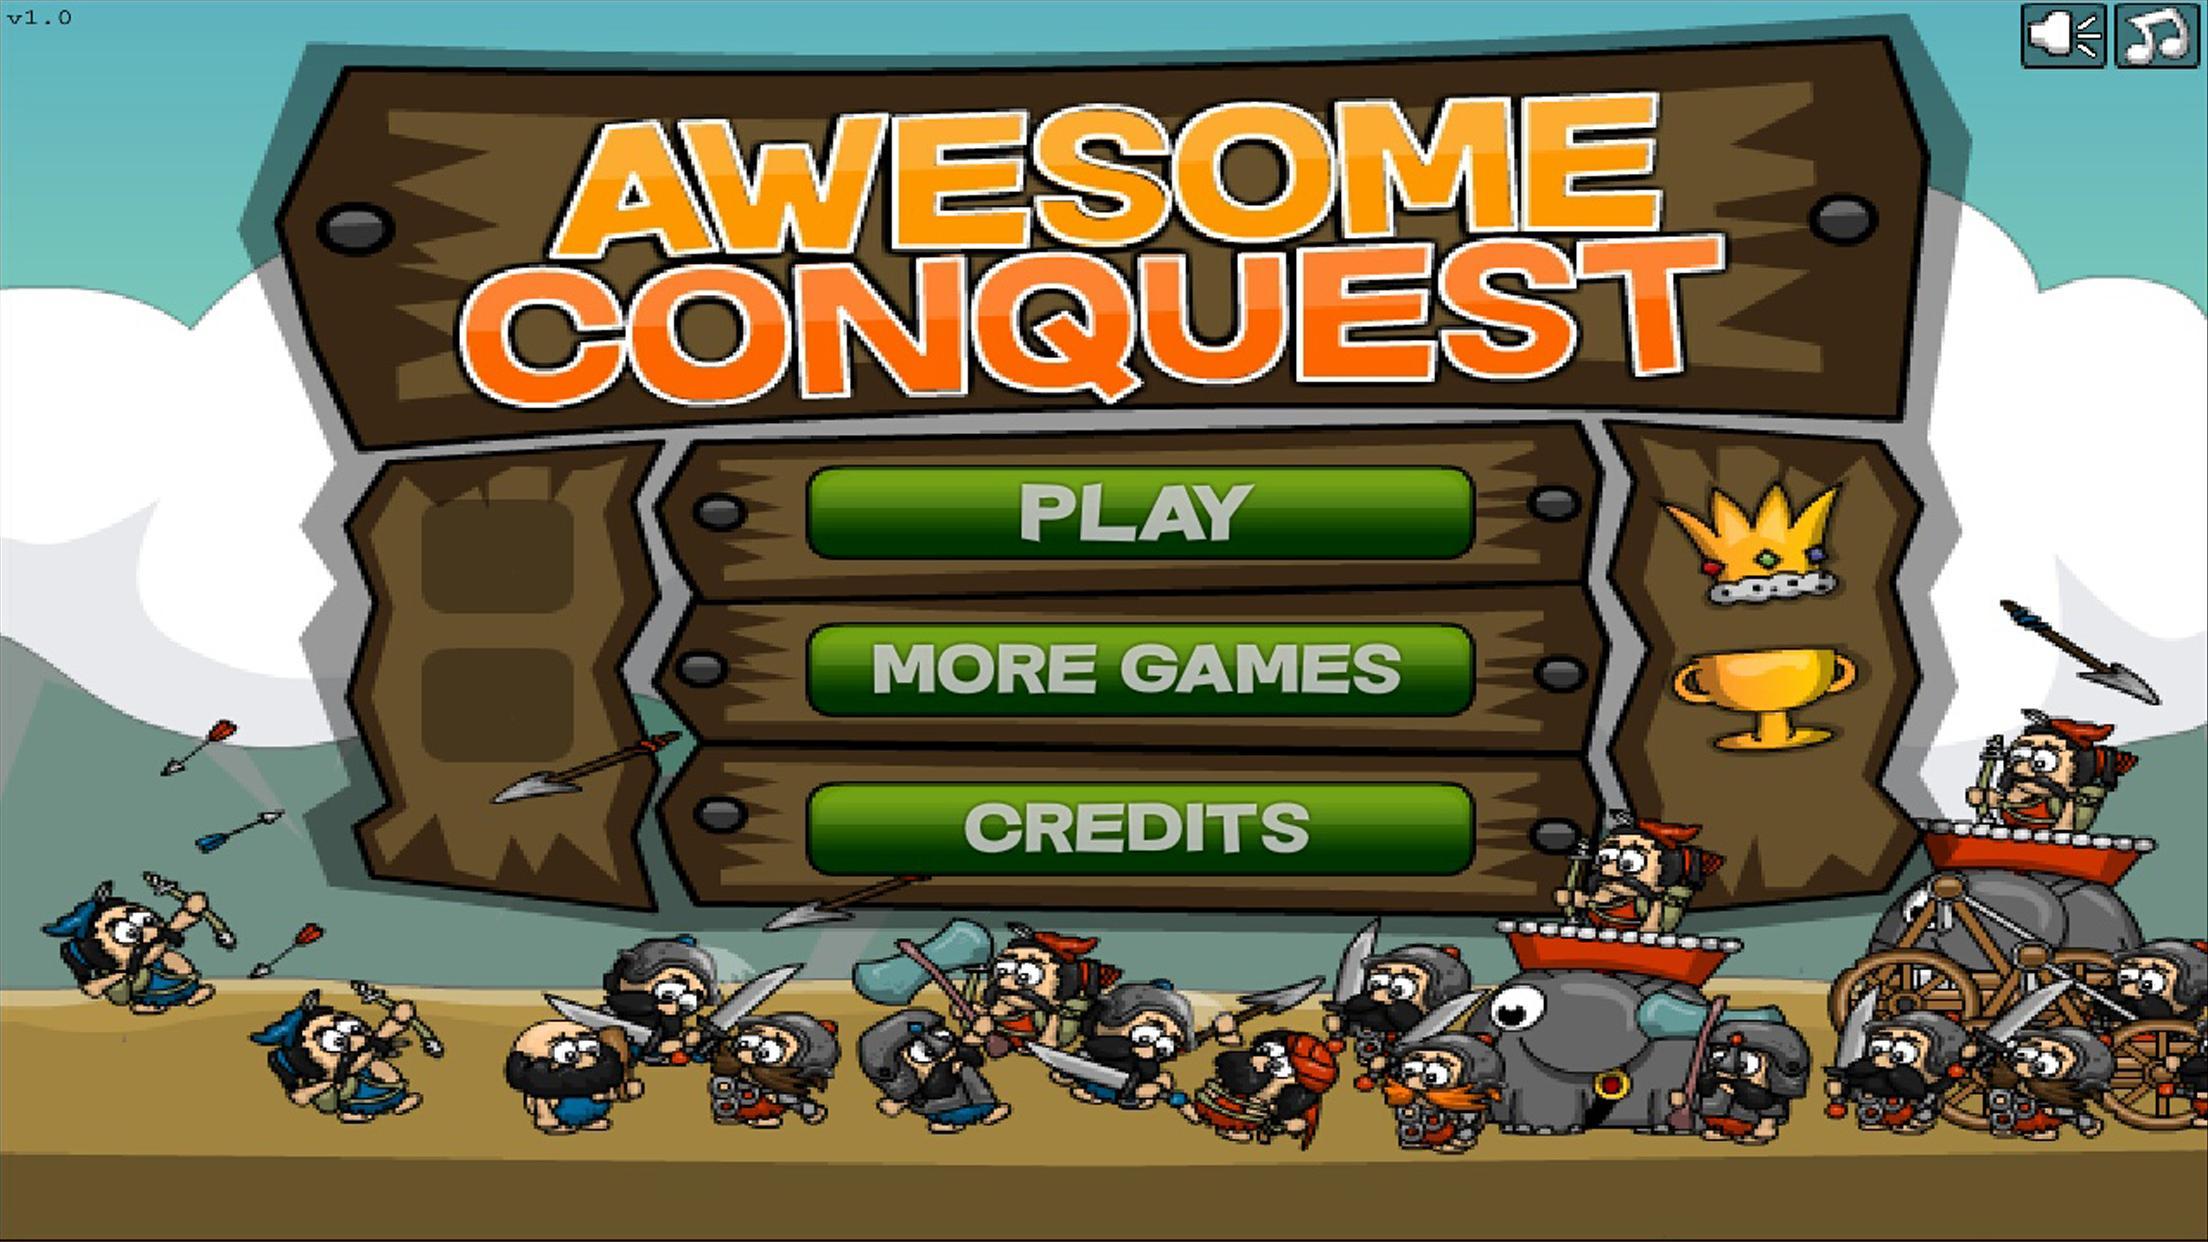 Awesome Conquest 포스터.